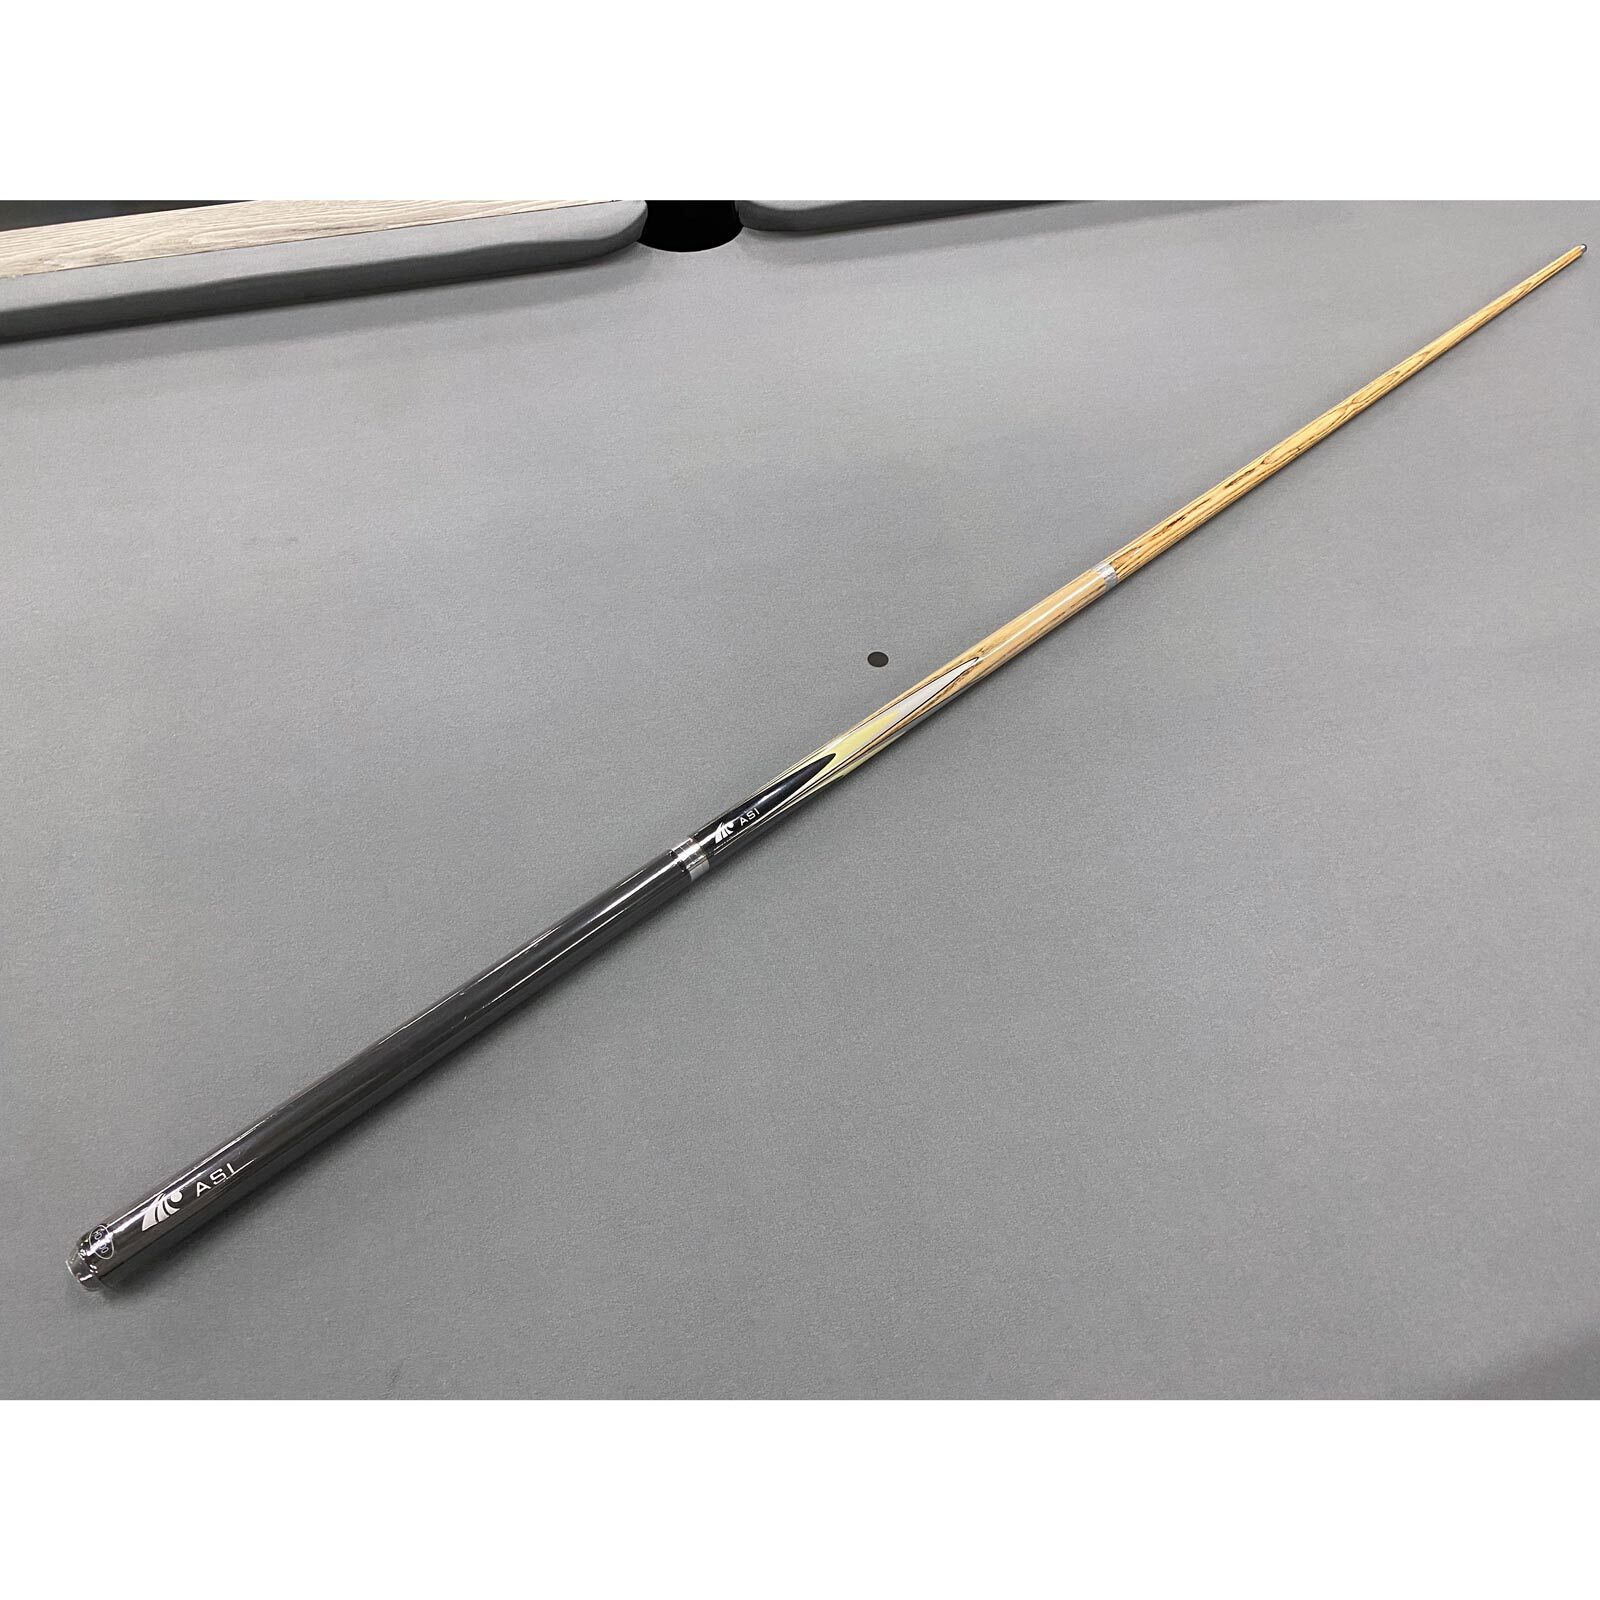 Riley ASI 2pc Ash cue, with weight adjustable HD-400